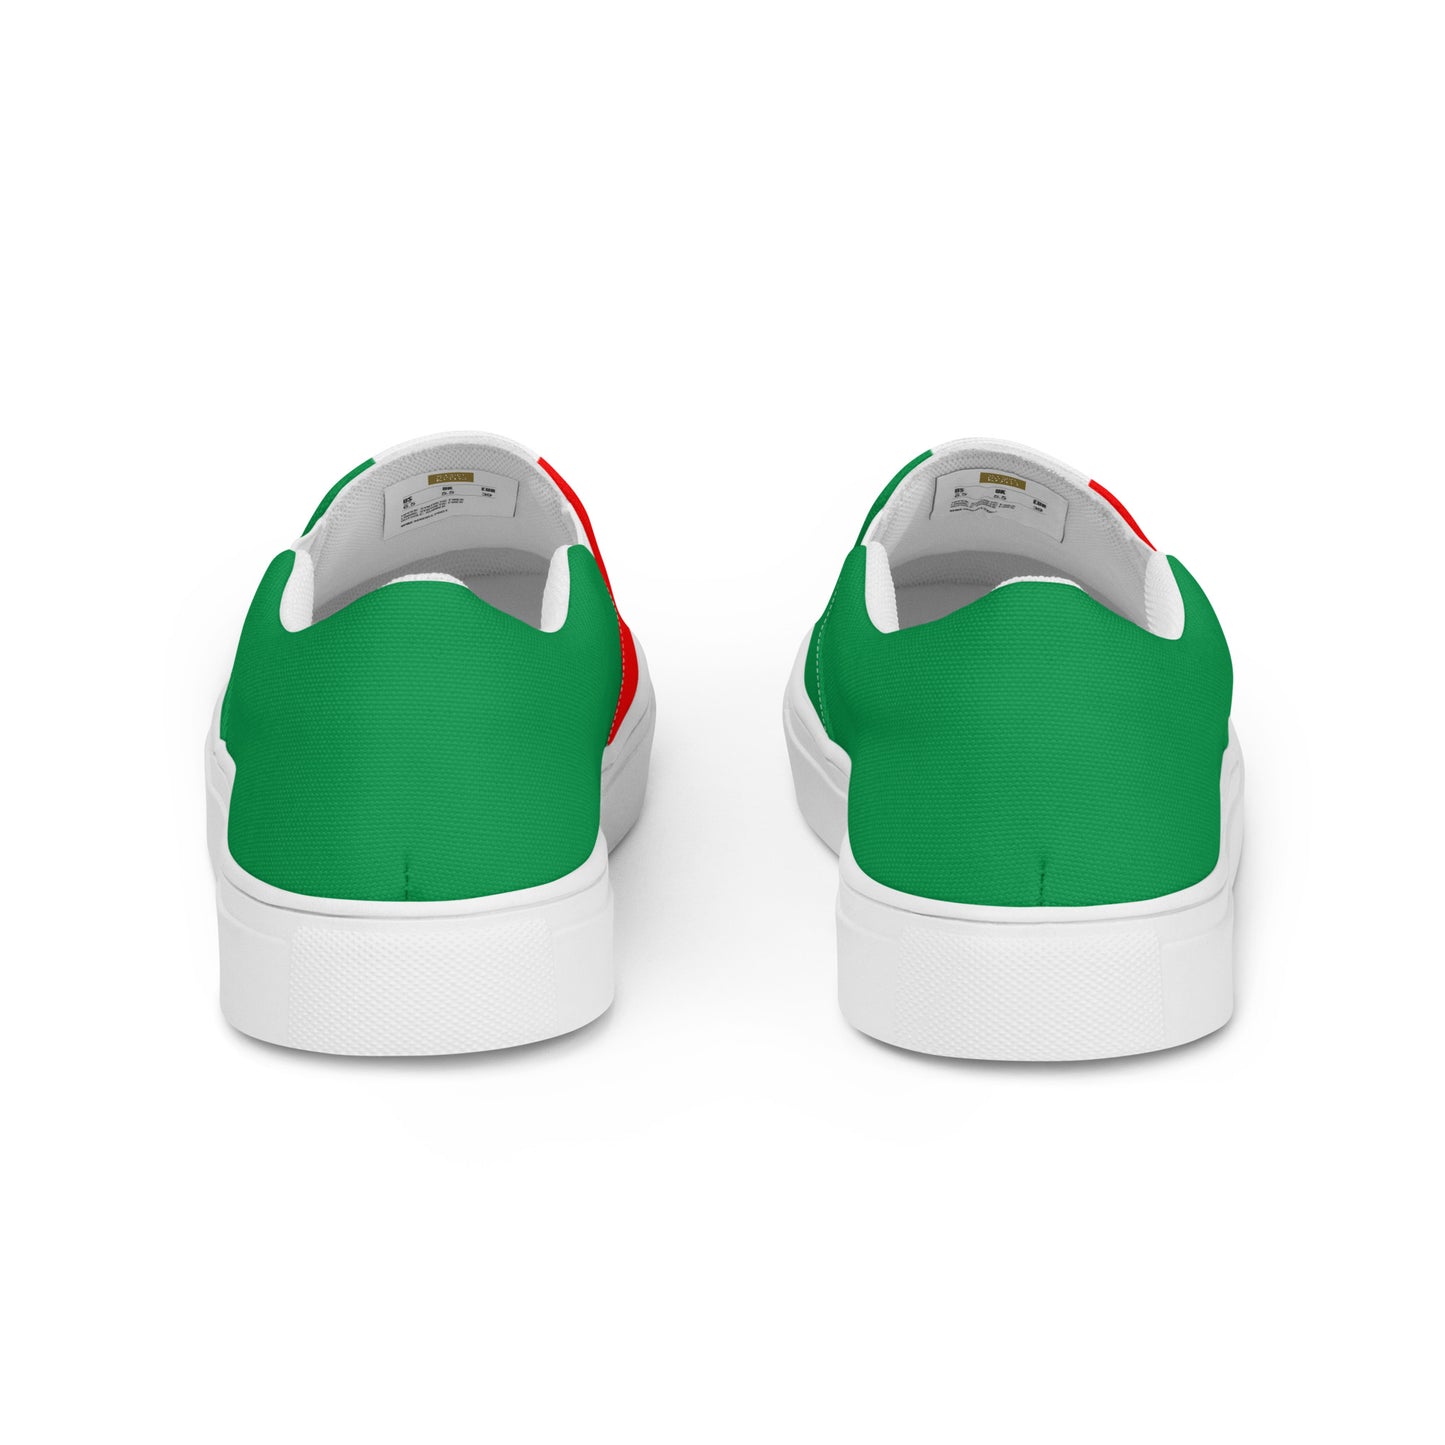 Italy Flag - Sustainably Made Women’s slip-on canvas shoes